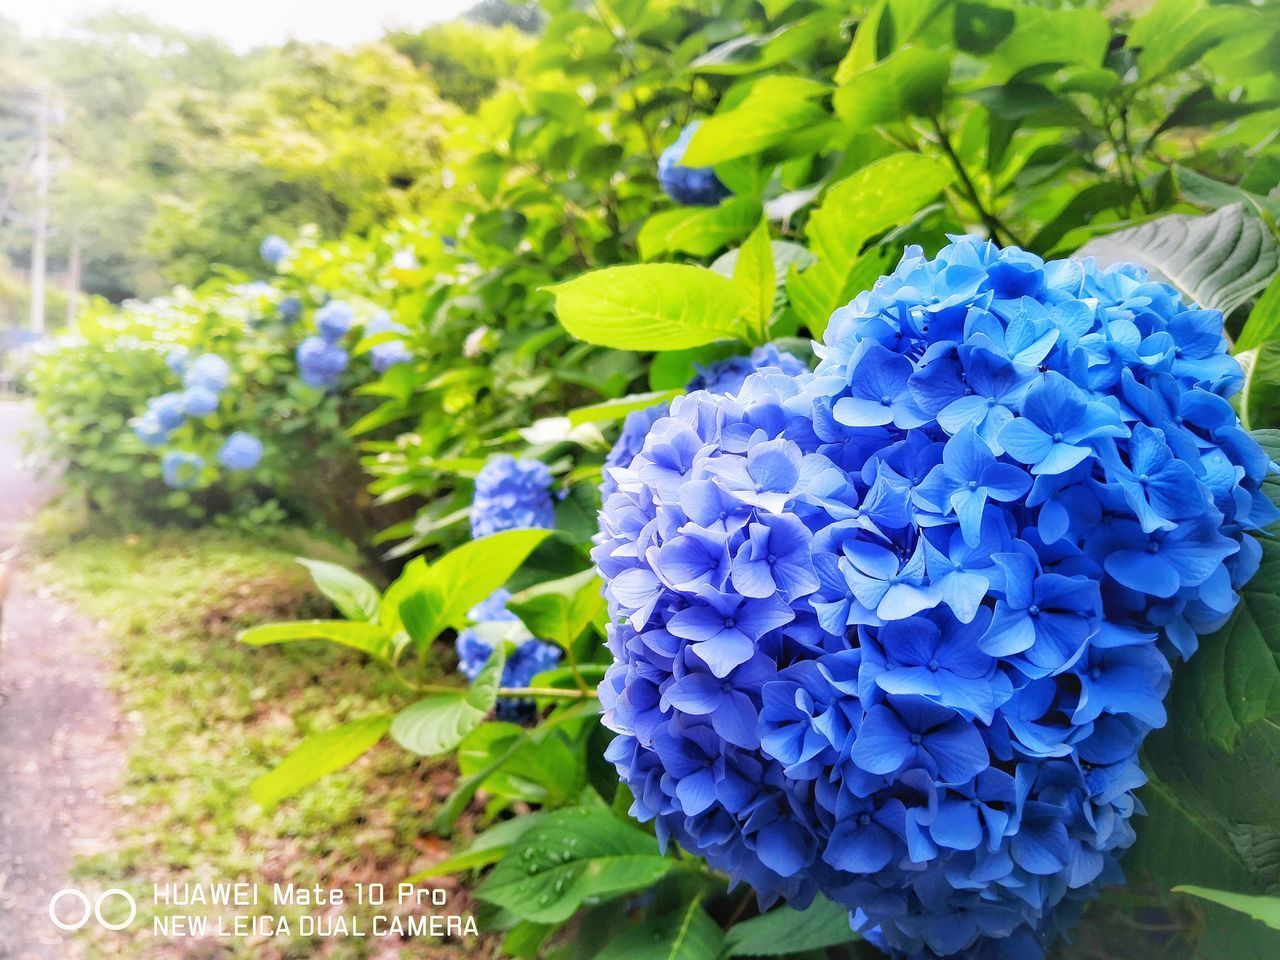 CLOSE-UP OF BLUE HYDRANGEA FLOWERS IN BLOOM